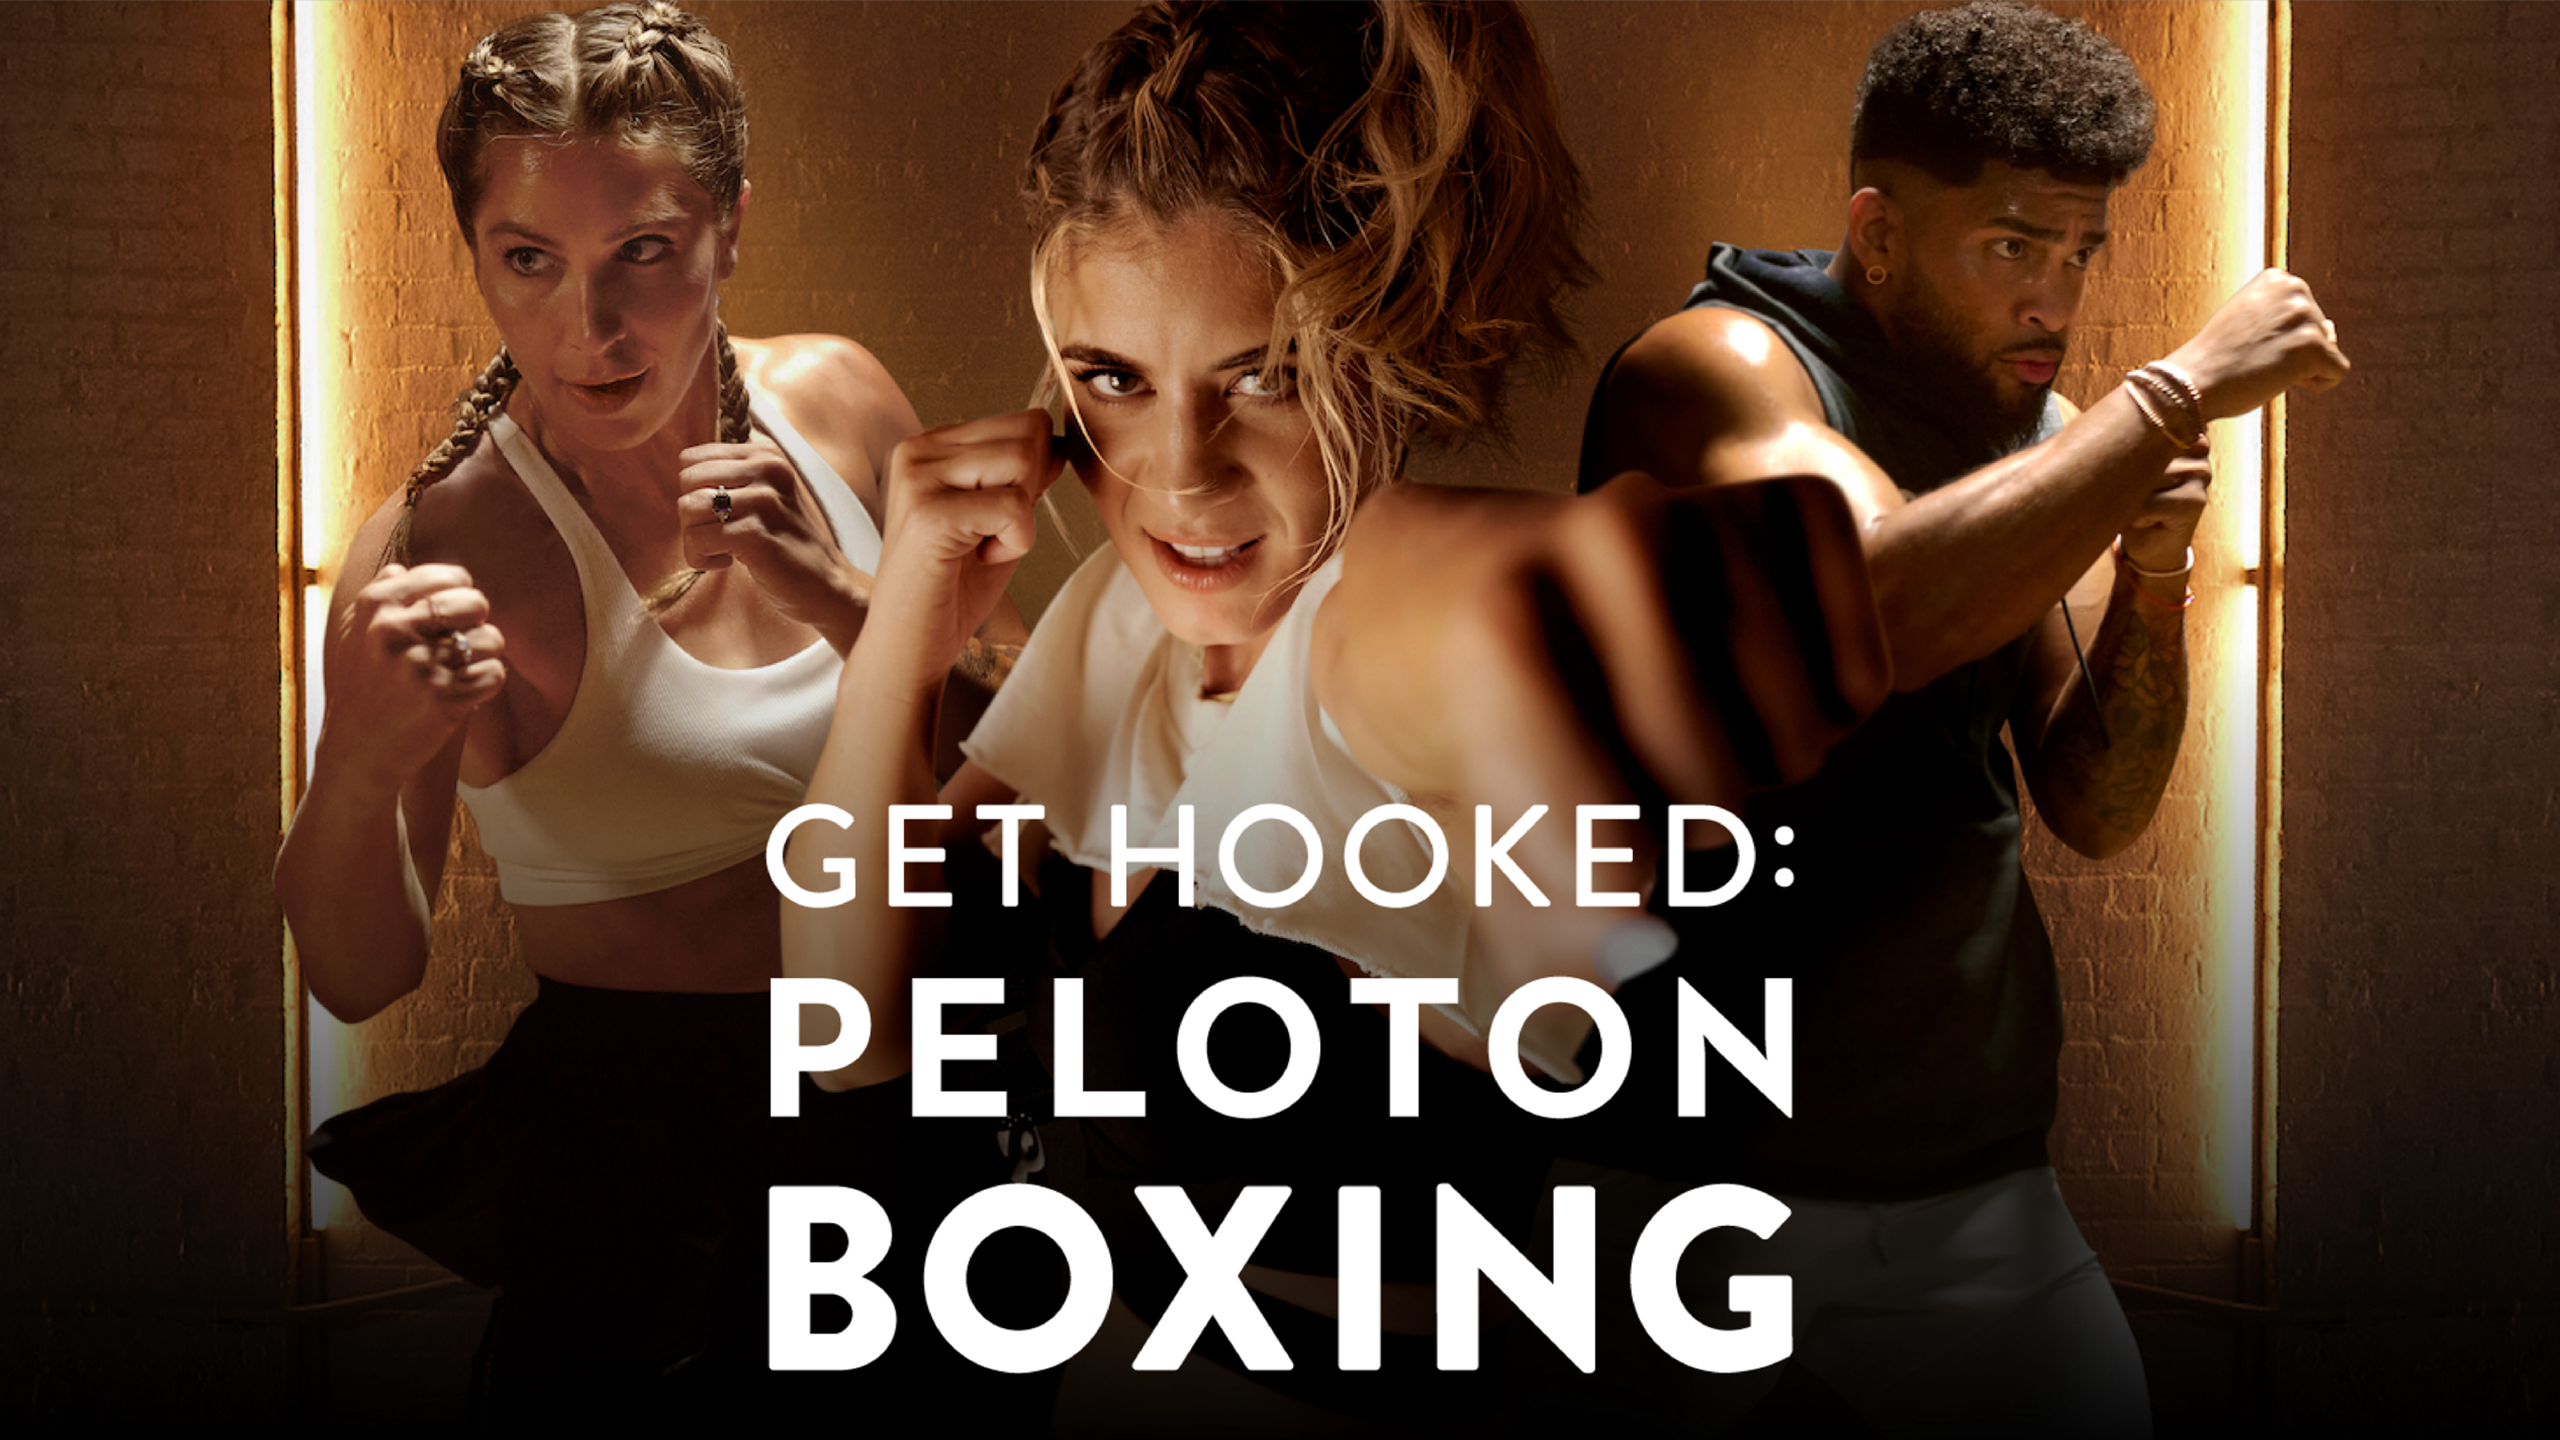 The Basics of Boxing, as Taught by Peloton Instructors